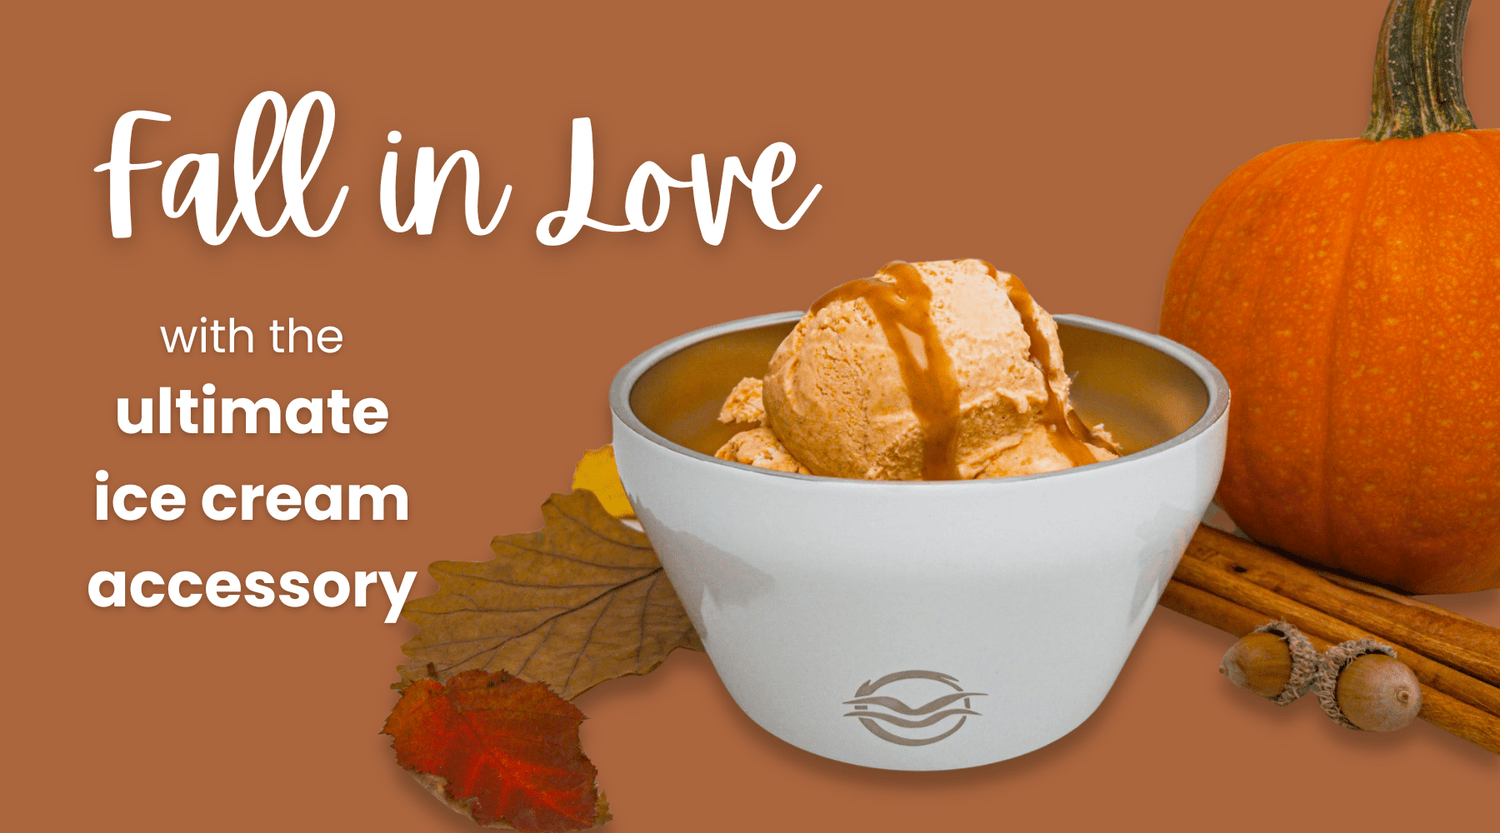 Fall in love with Calicle insulated ice cream bowls., they're the ultimate ice cream accessory